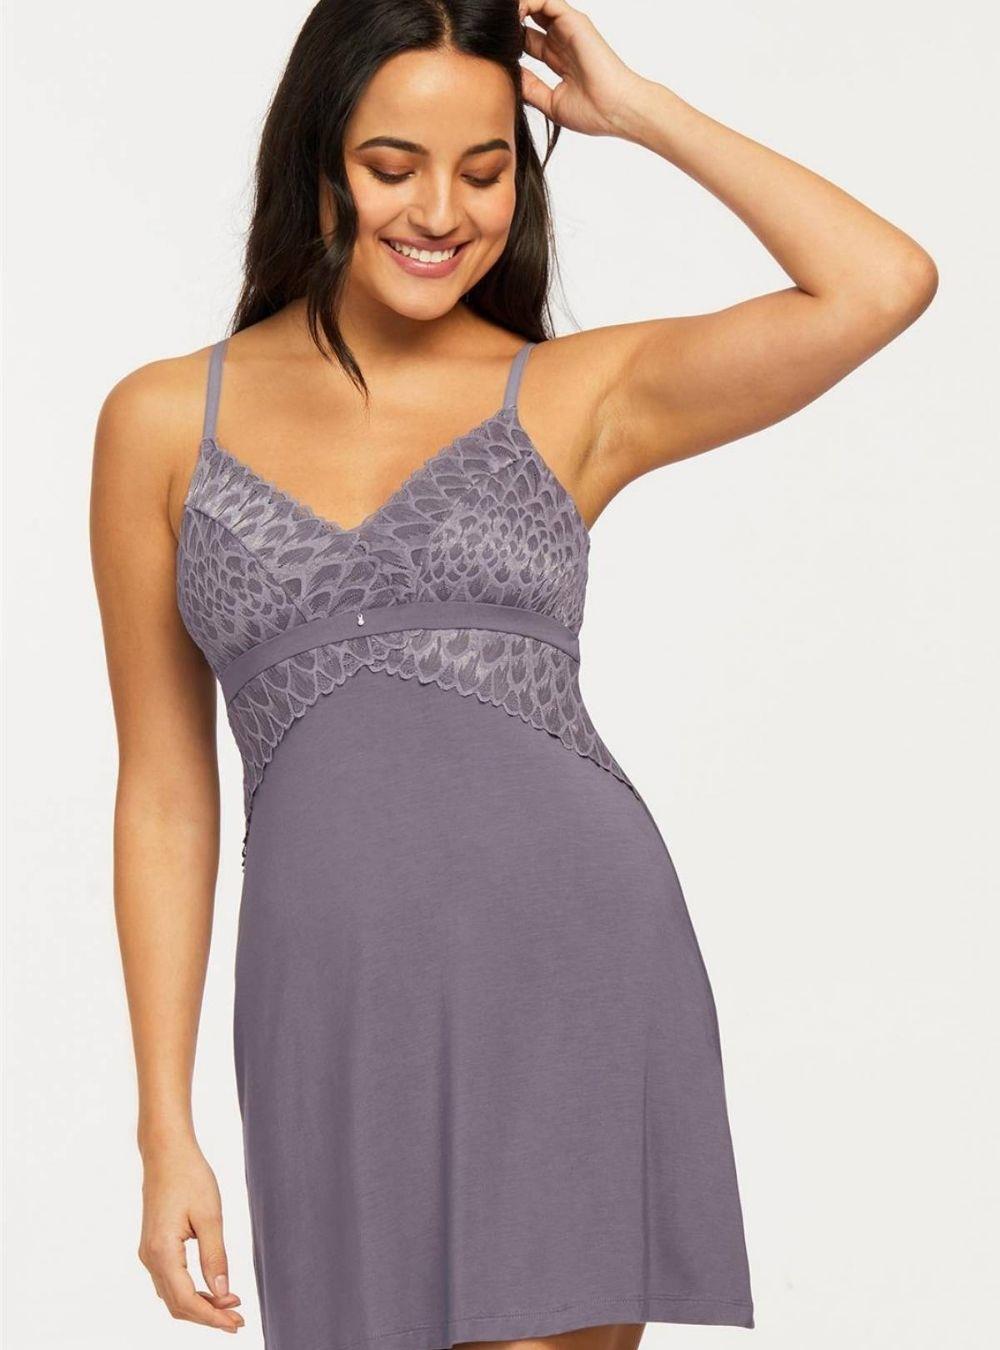 Montelle Bust Support Chemise